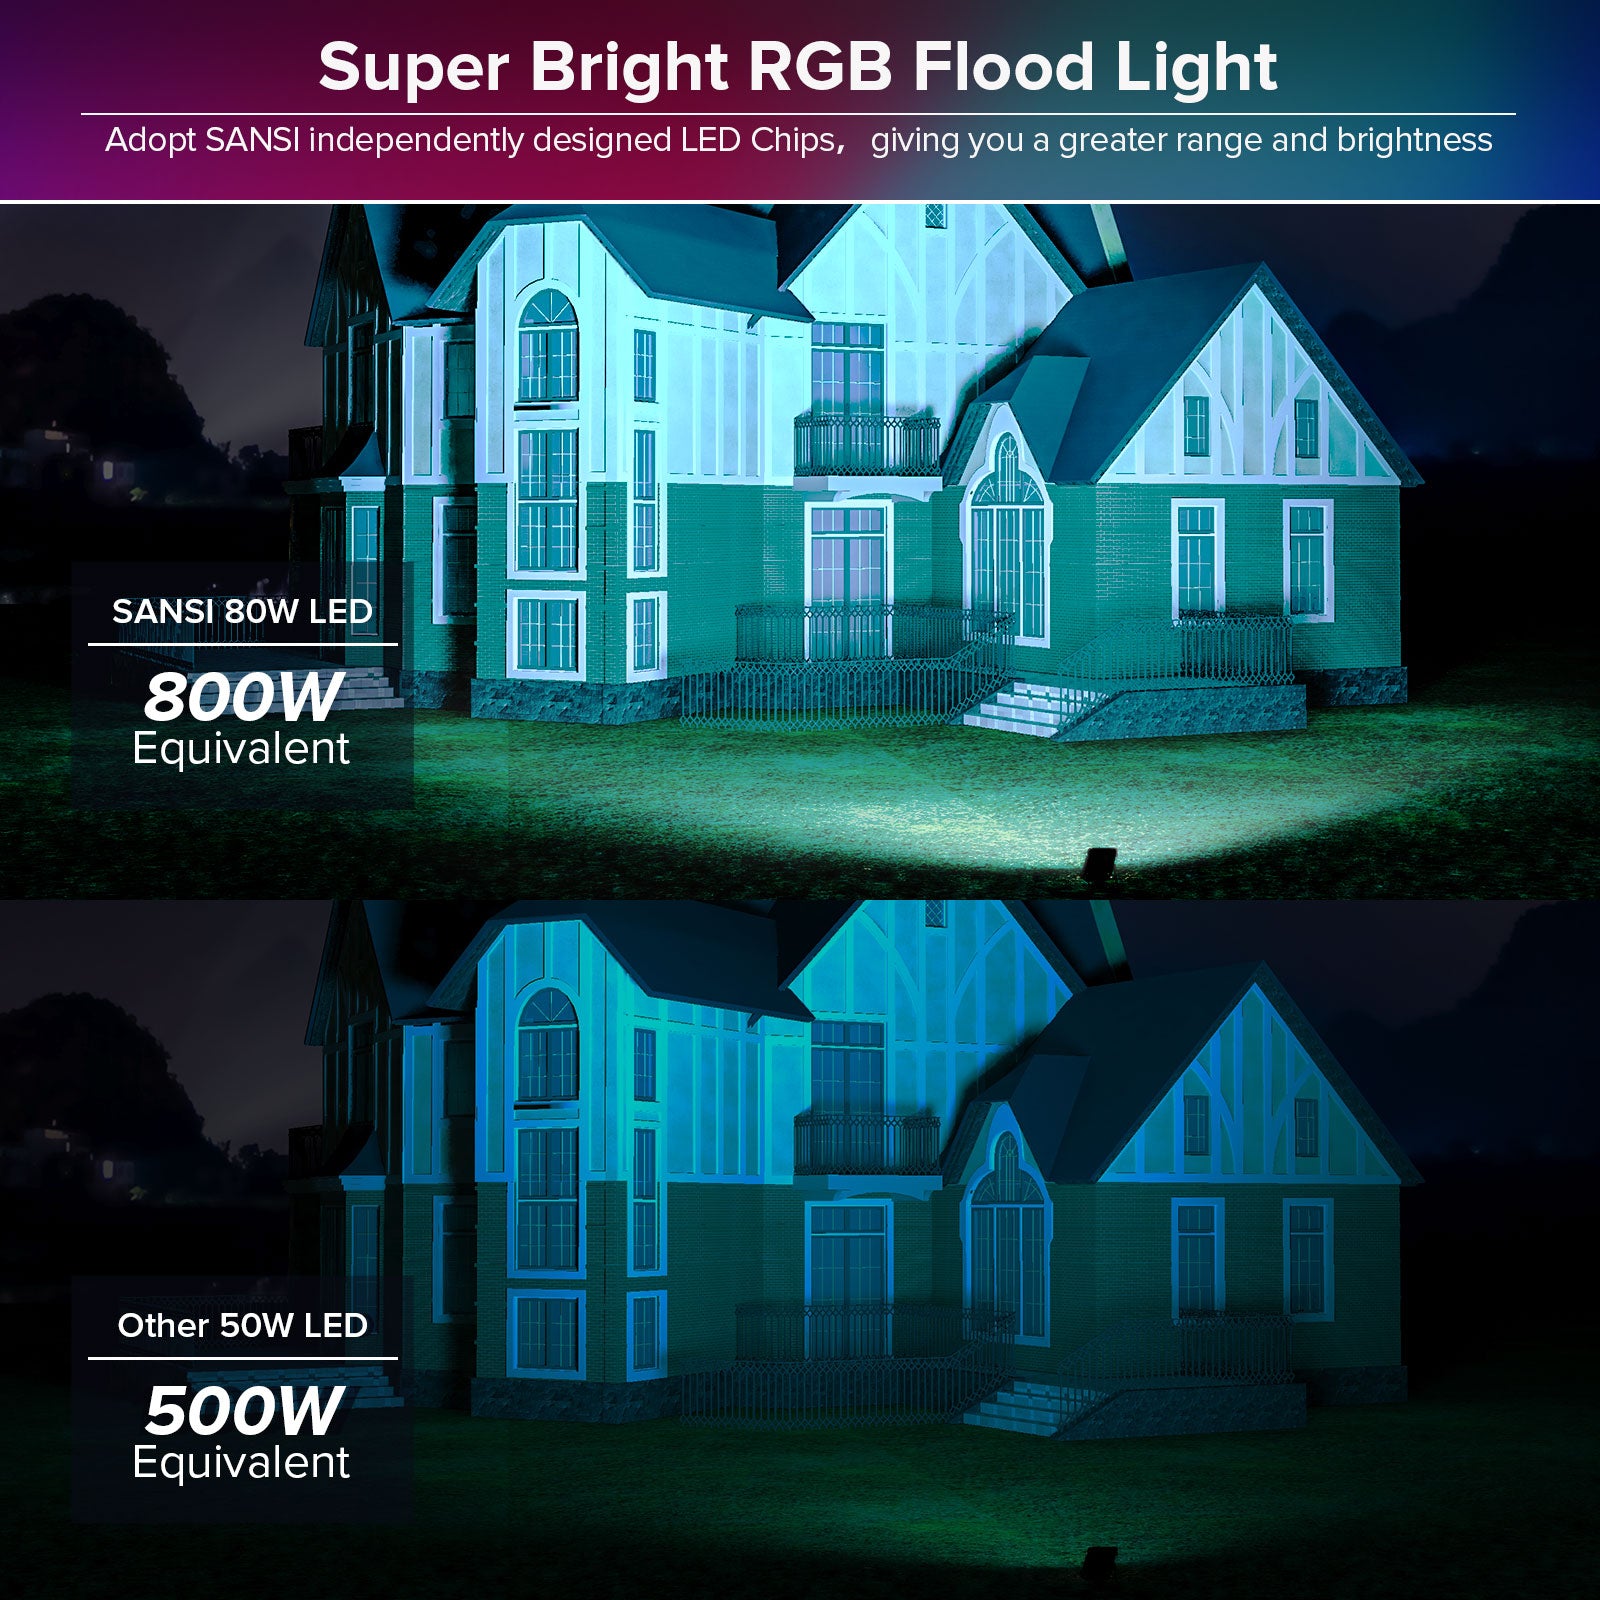 80W Super Bright RGB Led Flood Light，which is adopted SANSI independently designed LED Chips， giving you a greater range and brightness.